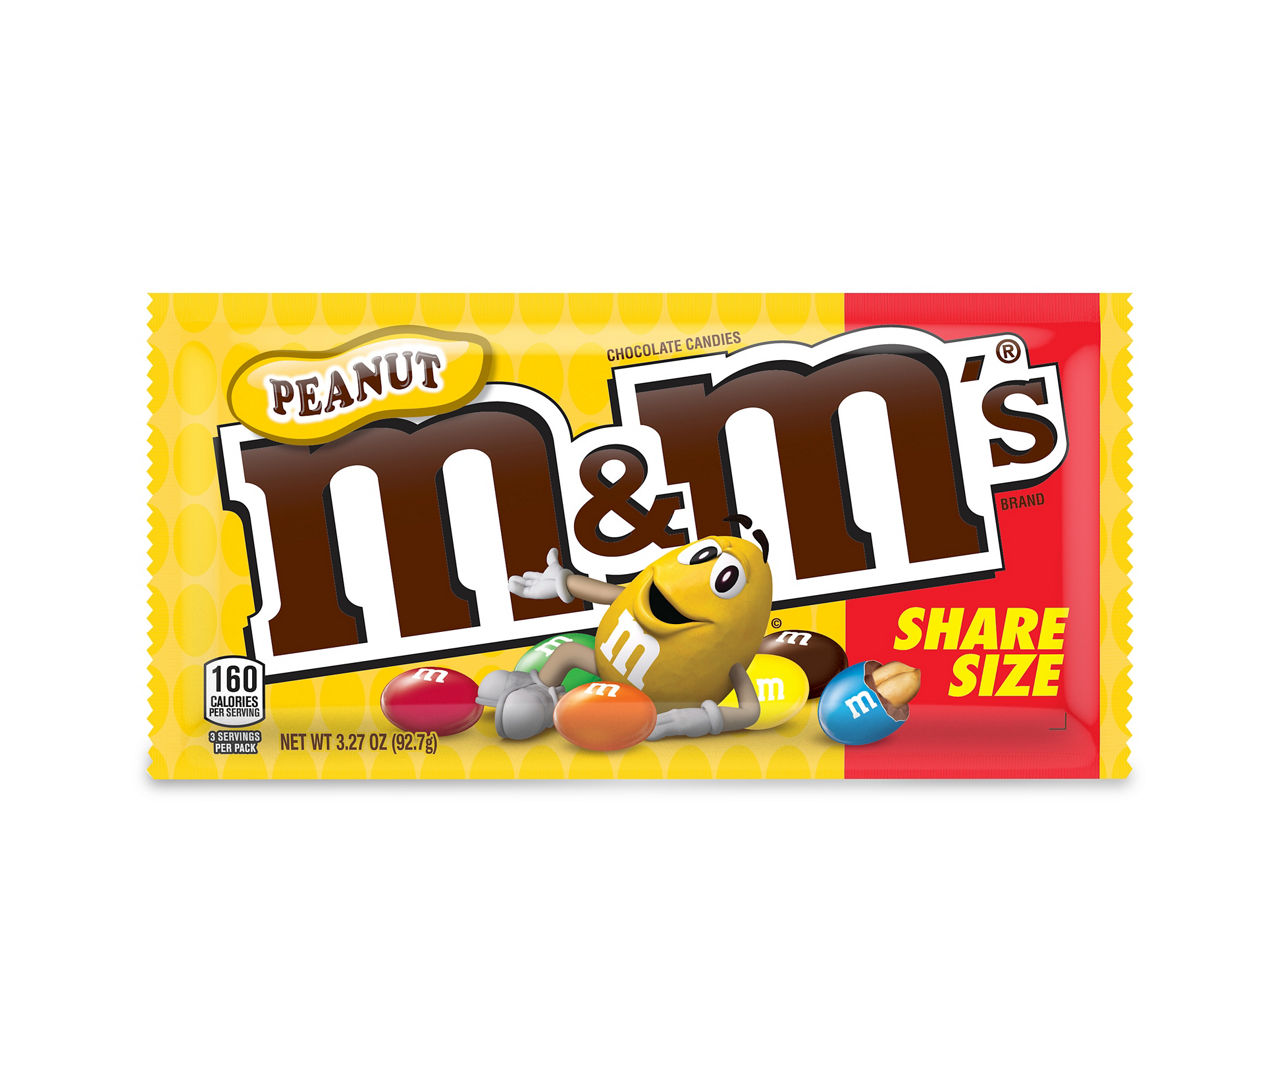 Save on M&M's Peanut Chocolate Candies Family Size Order Online Delivery